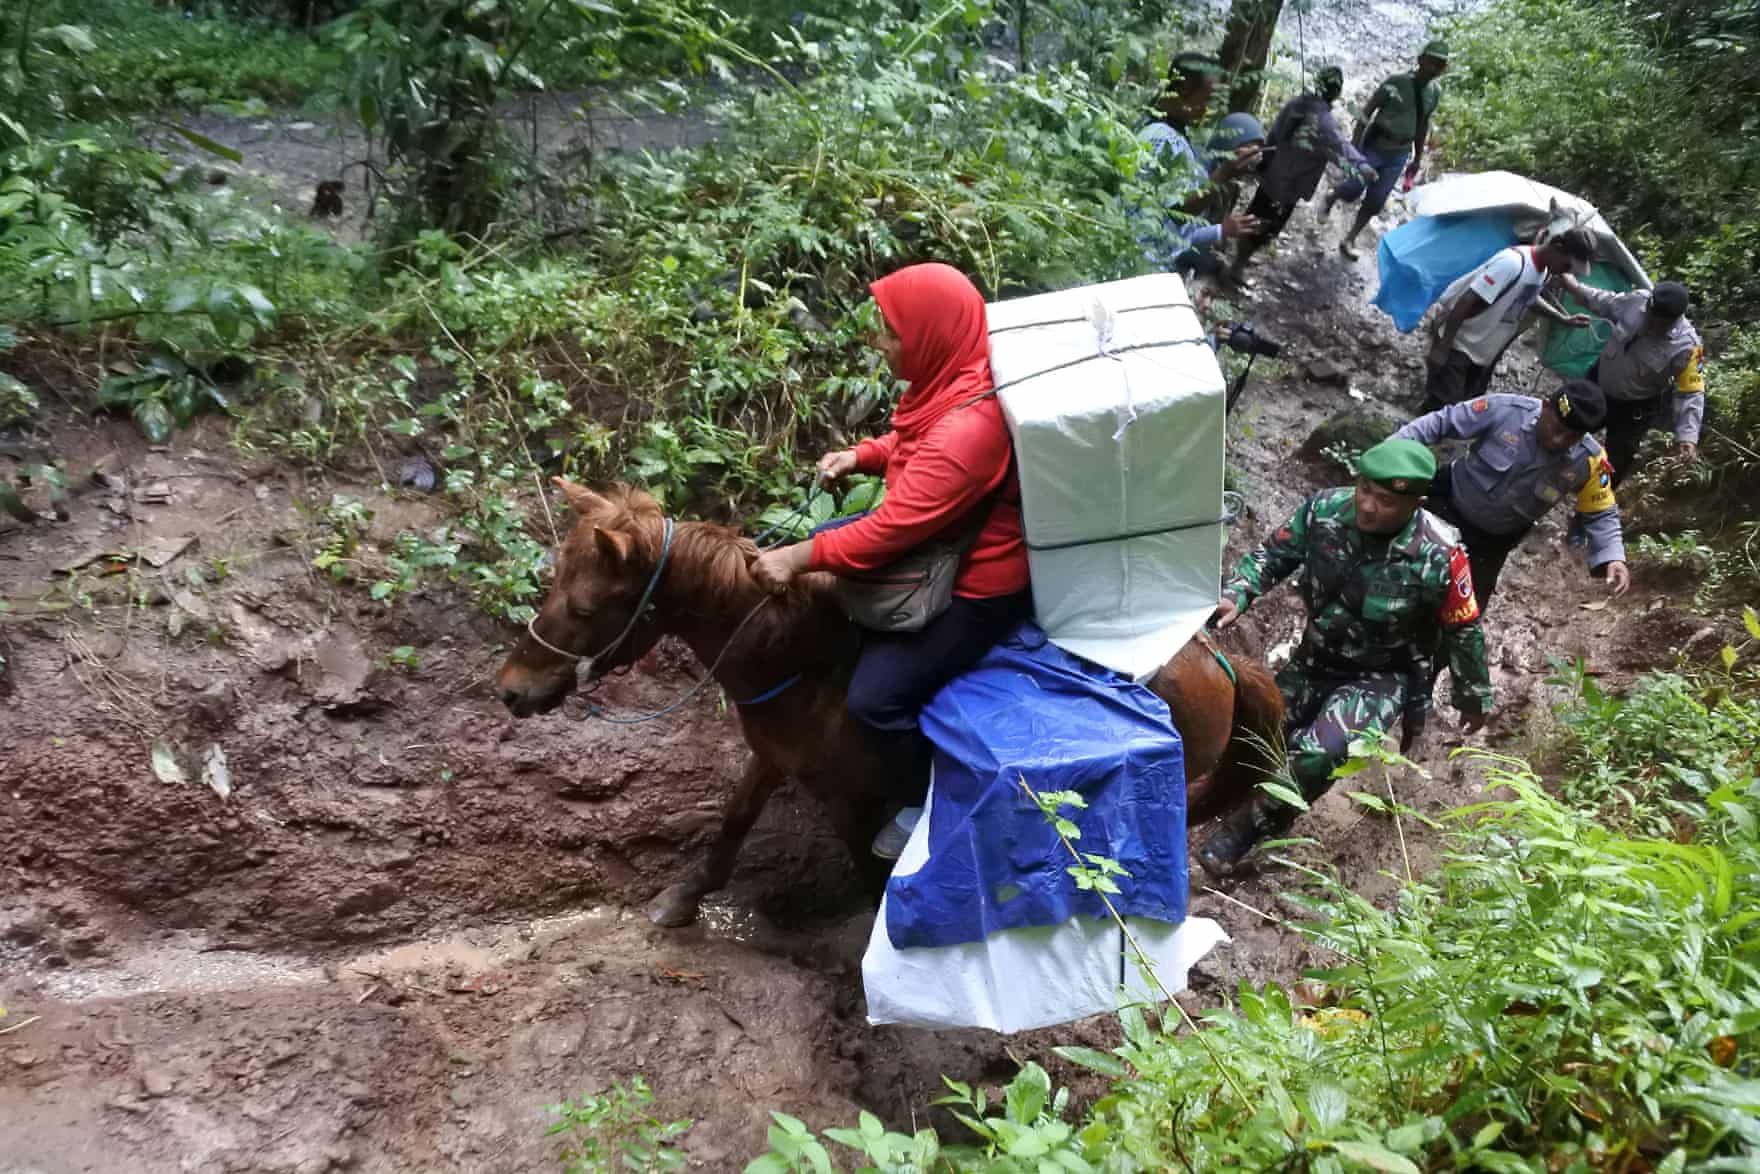 Photos of Indonesian Election Workers Riding Elephants & Crossing Rivers to Deliver Ballot Boxes Go Viral - WORLD OF BUZZ